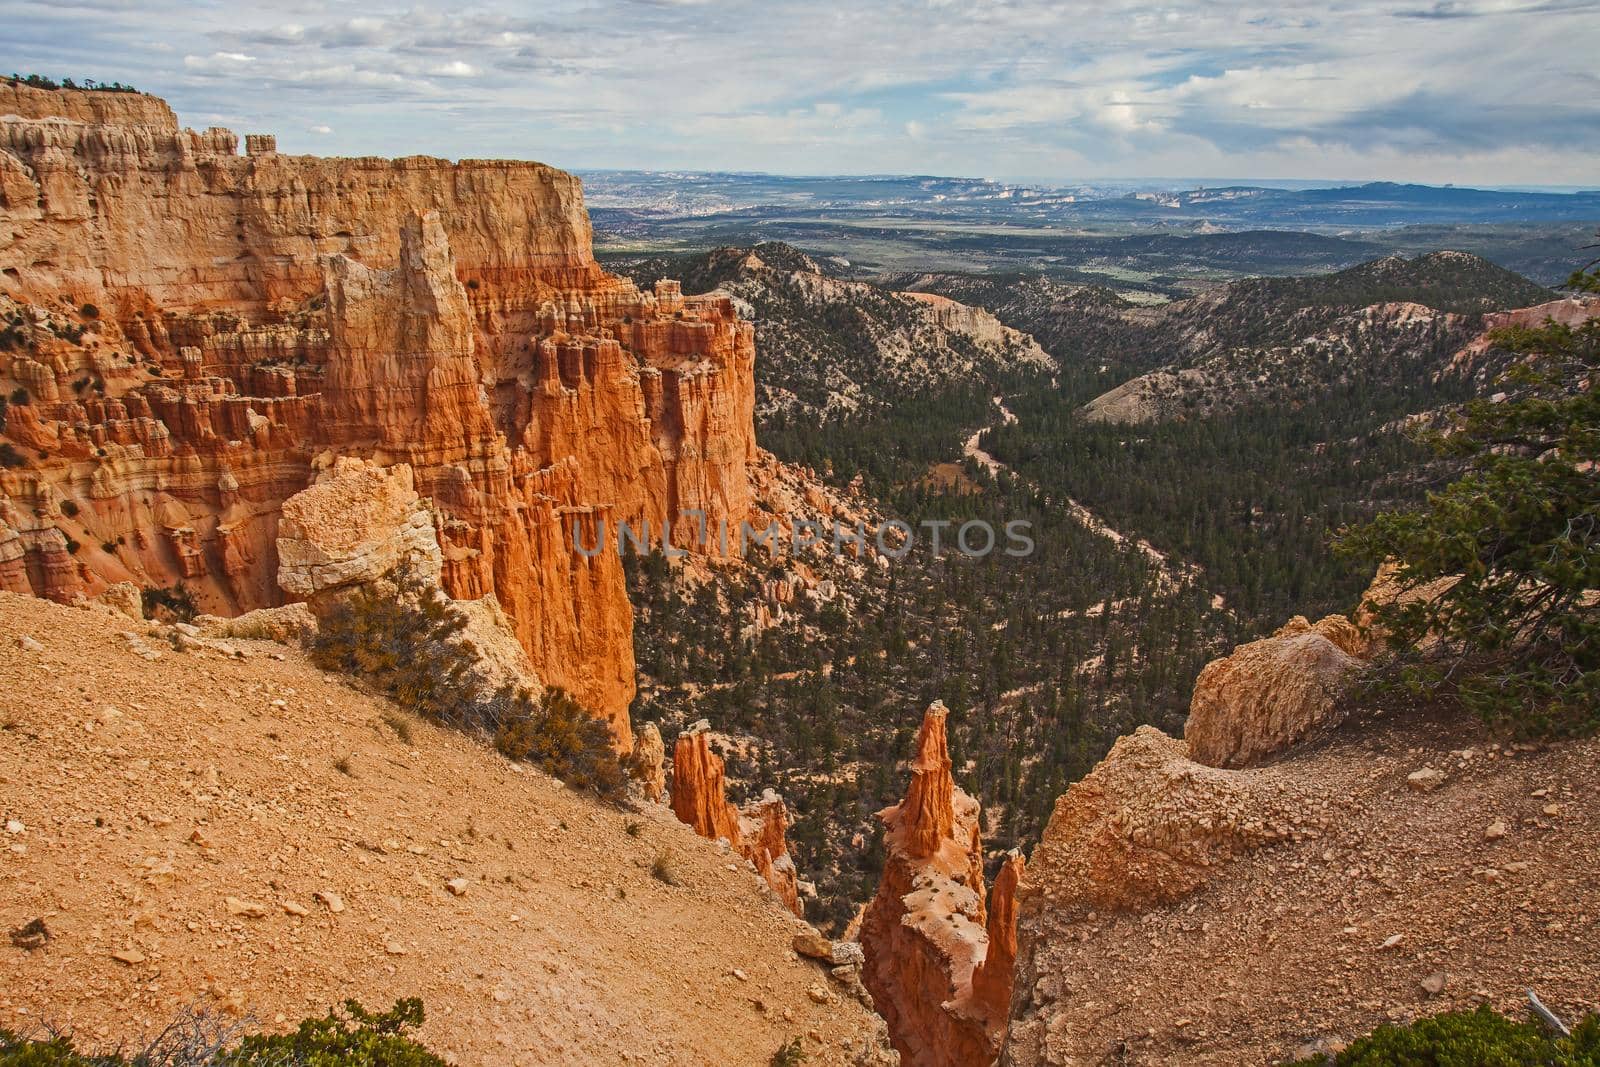 Paria View Bryce Canyon 2537 by kobus_peche